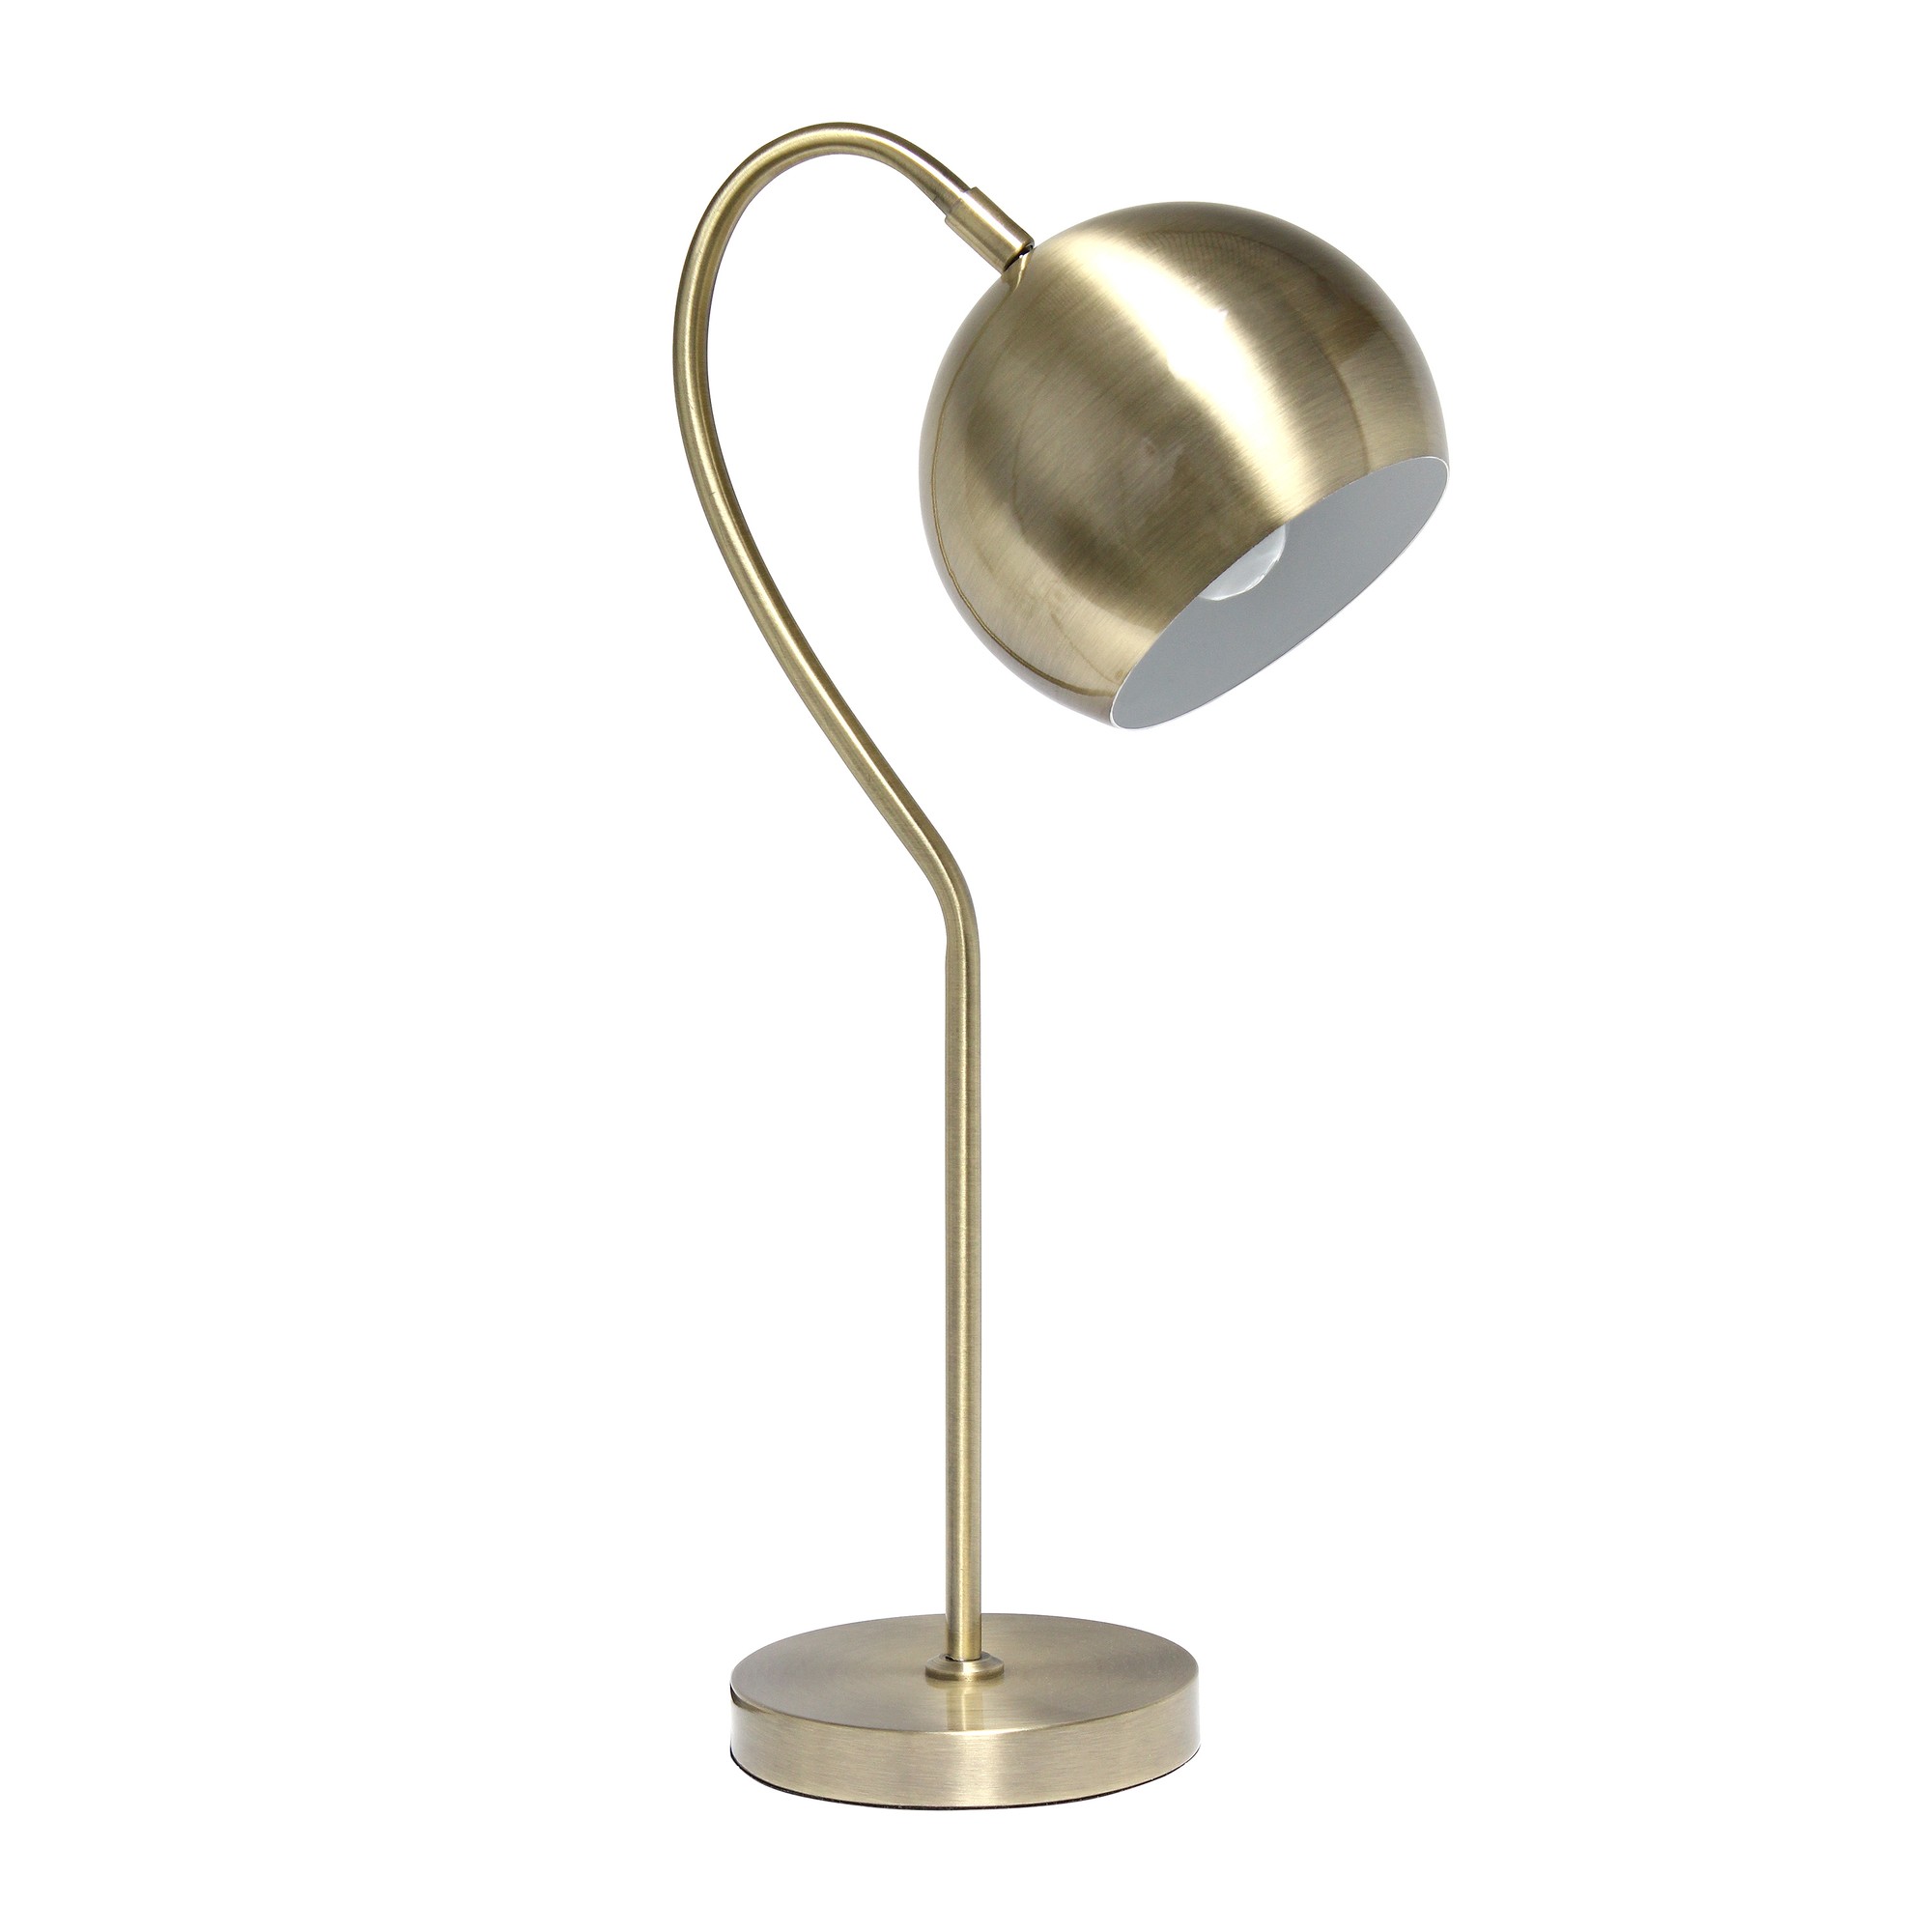 Lalia Home Mid Century Curved Table Lamp with Dome Shade, Antique Brass